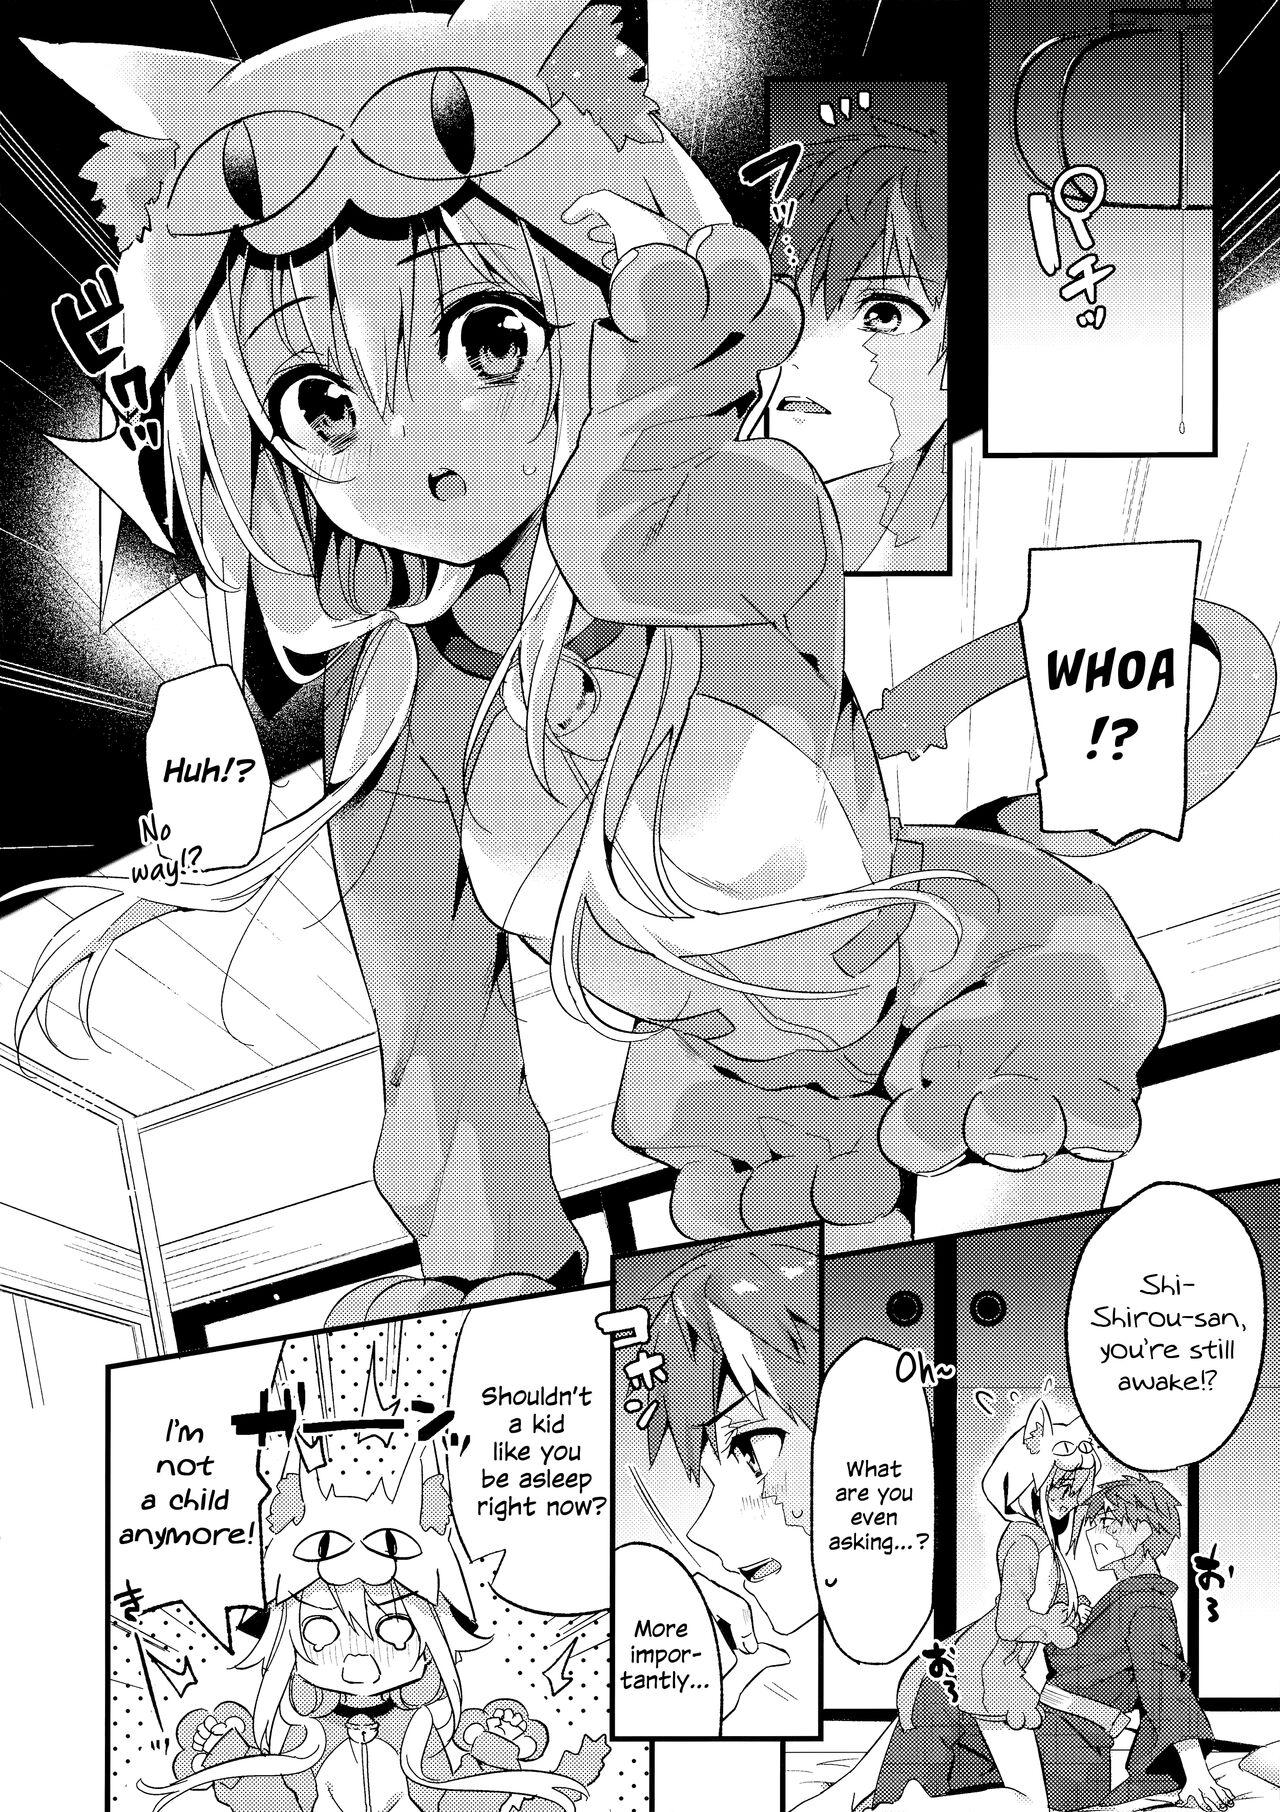 Amateur Porn Onii-chan, Illya to Shiyo? - Fate kaleid liner prisma illya Hot Blow Jobs - Page 5